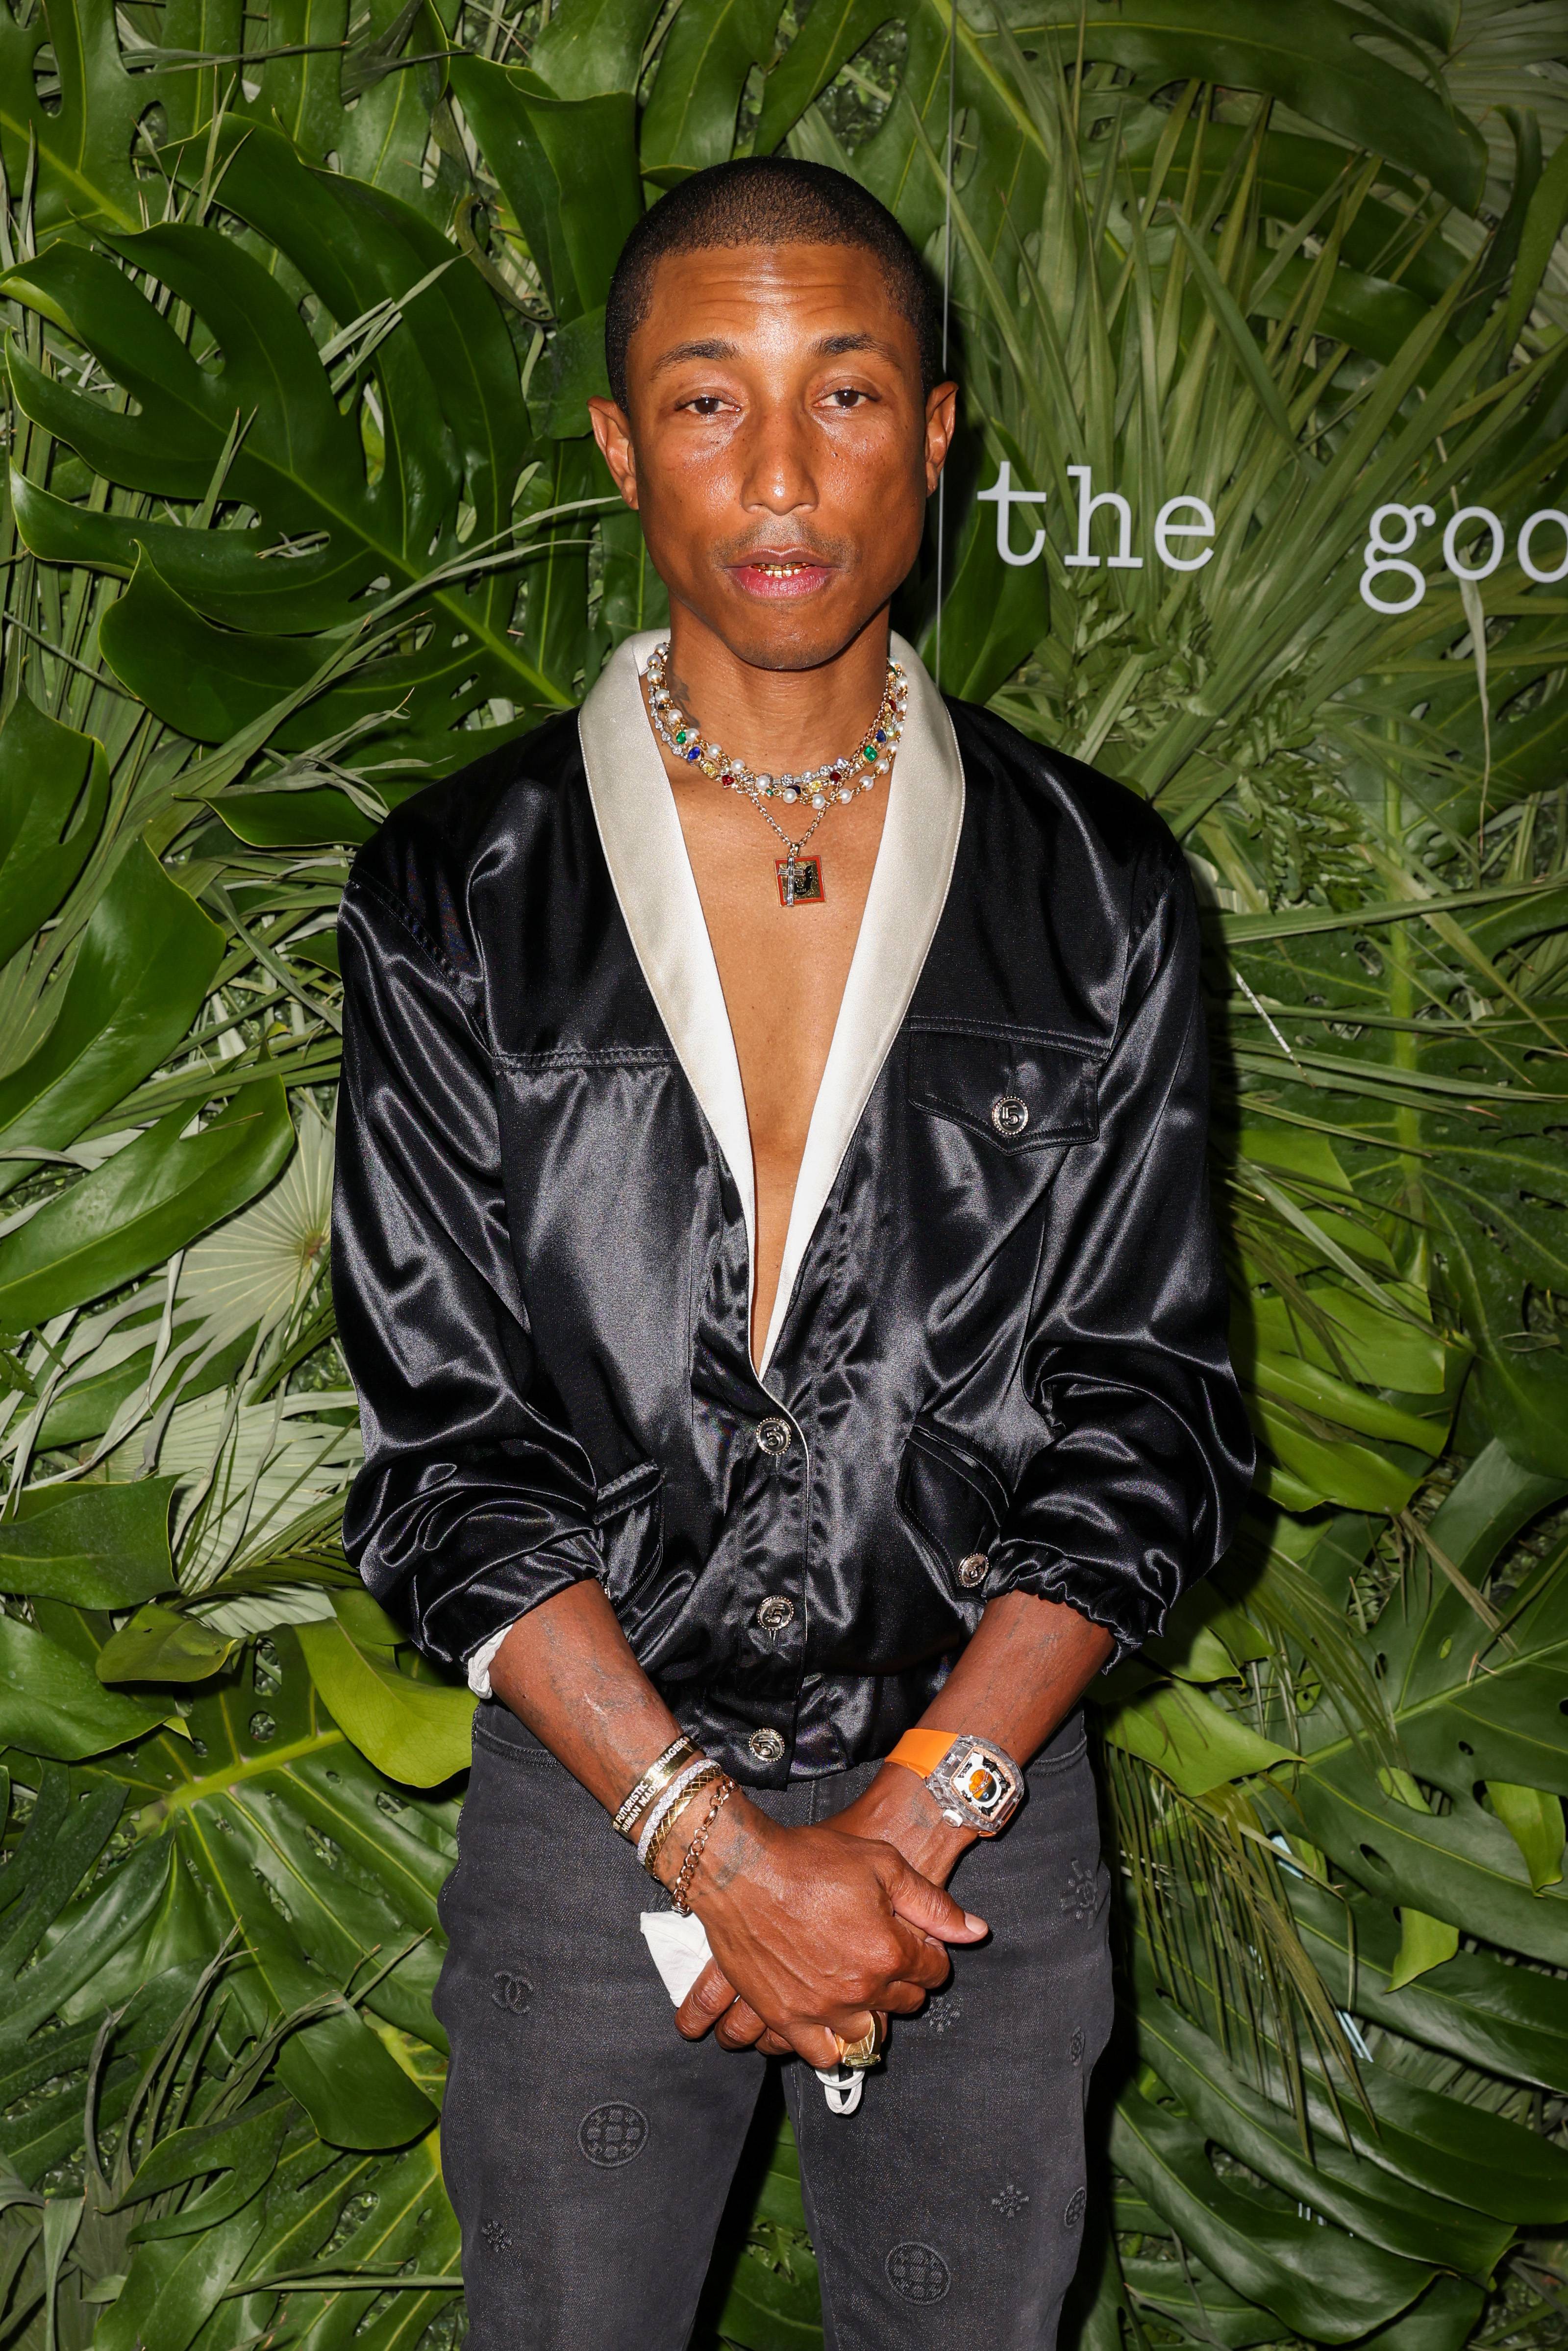 MIAMI BEACH, FLORIDA - APRIL 16: Pharrell Williams attends the Inter Miami CF Season Opening Party Hosted By David Grutman And Pharrell Williams at The Goodtime Hotel on April 16, 2021 in Miami Beach, Florida. (Photo by Alexander Tamargo/Getty Images)